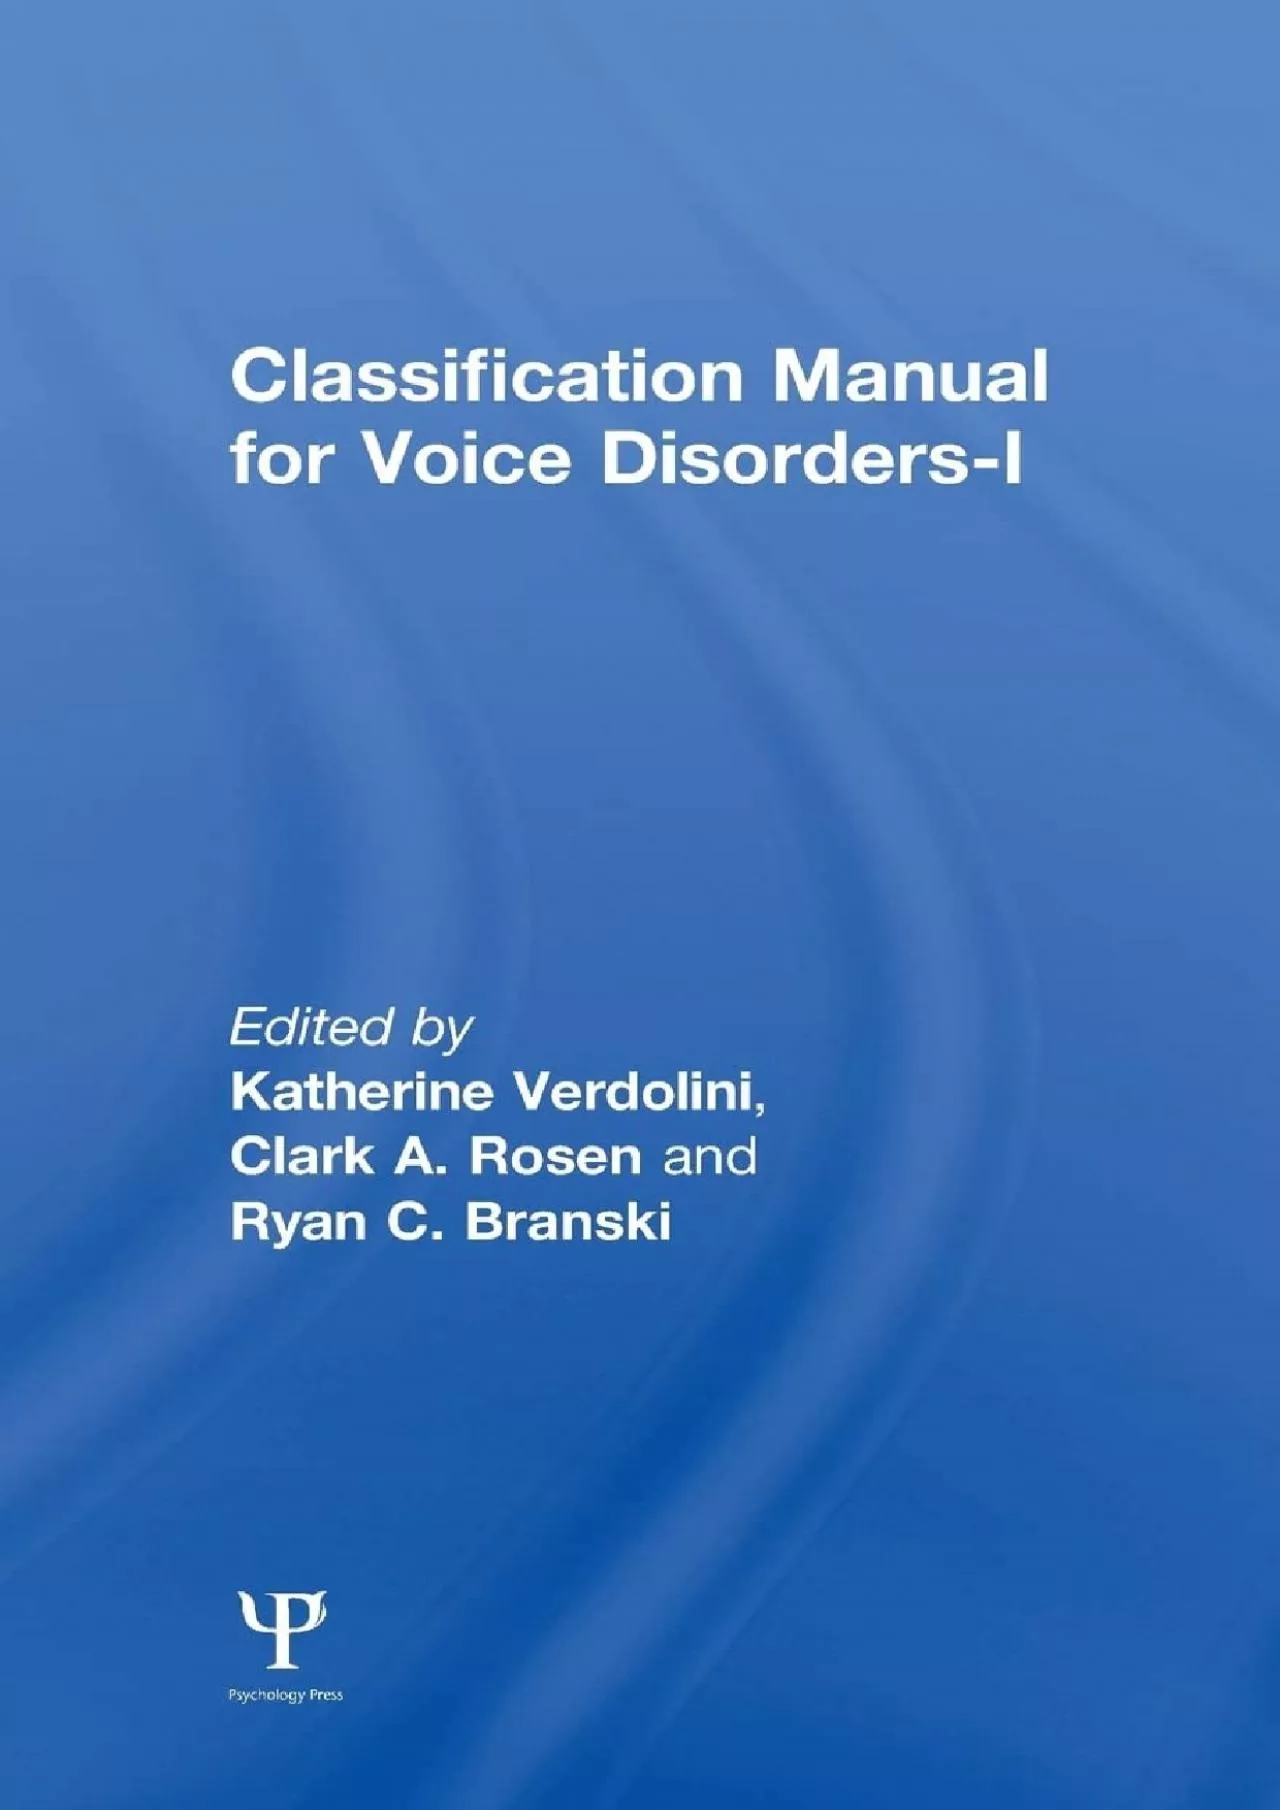 (DOWNLOAD)-Classification Manual for Voice Disorders-I